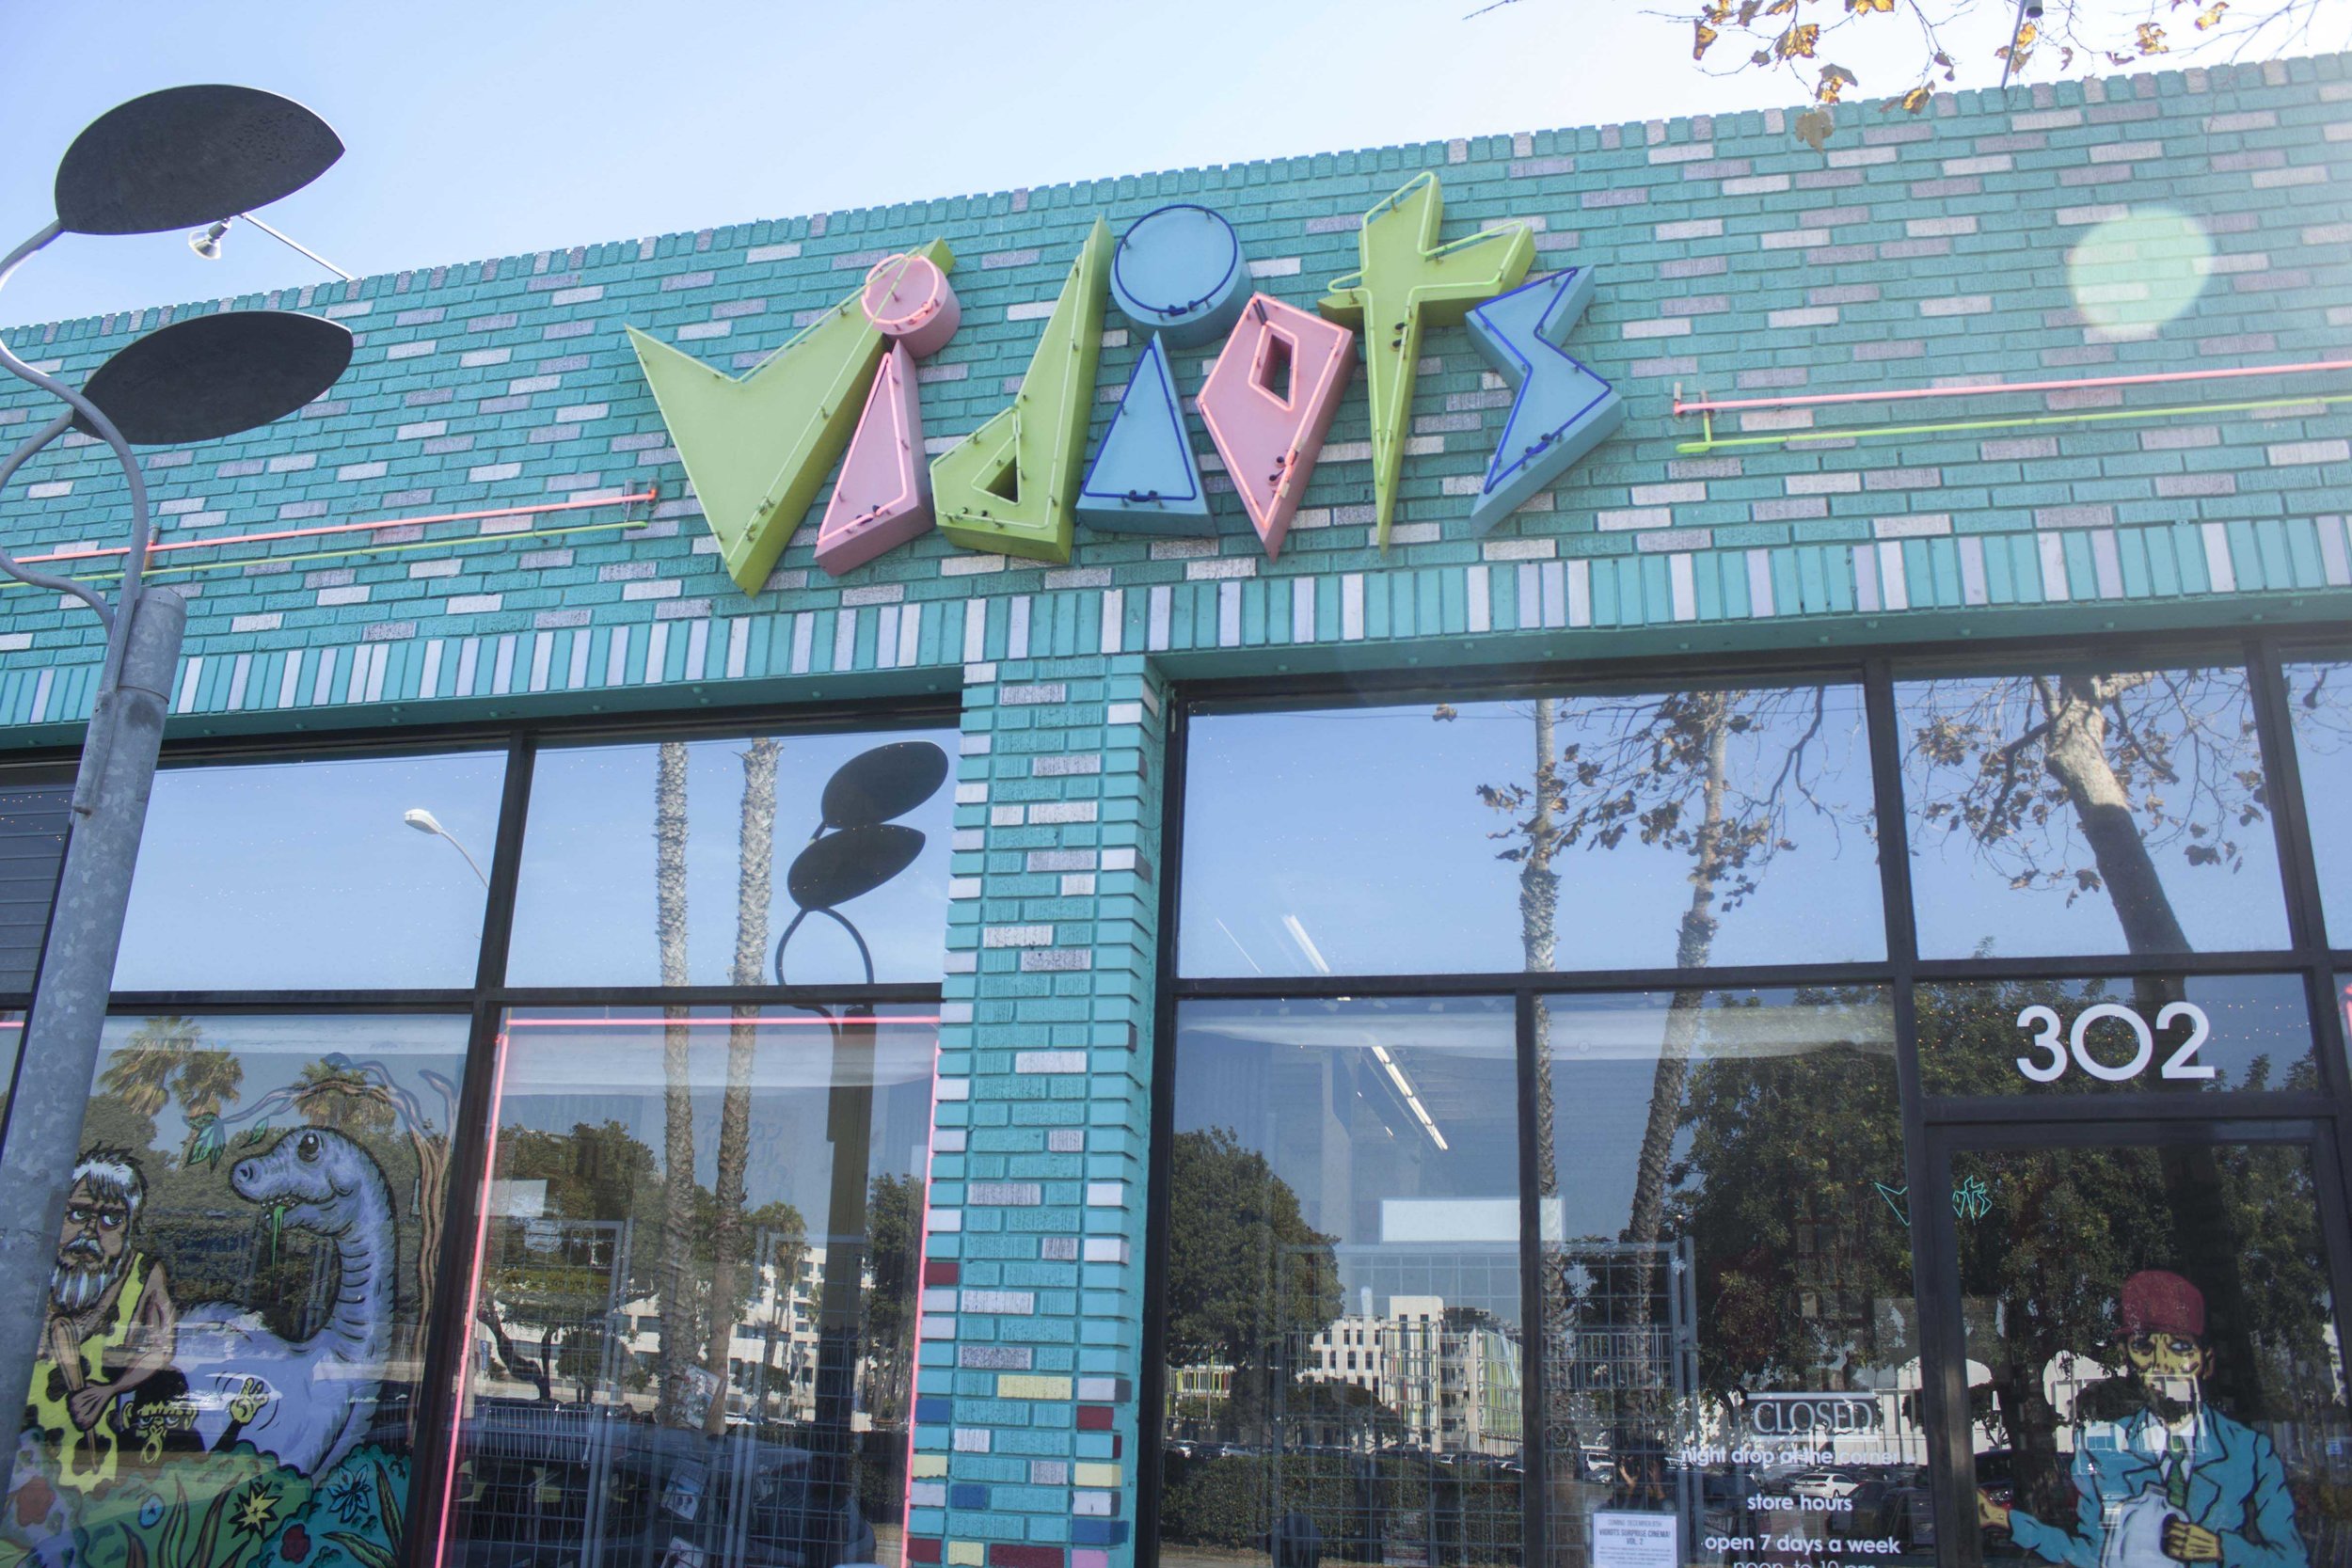  Vidiots, the 31 year old movie rental store located at 302 Pico Blvd, Santa Monica, CA 90405 on November 29, 2016. The unique store had trouble in recent years trying to find funding to keep its doors open. At this time the store was open after a cr